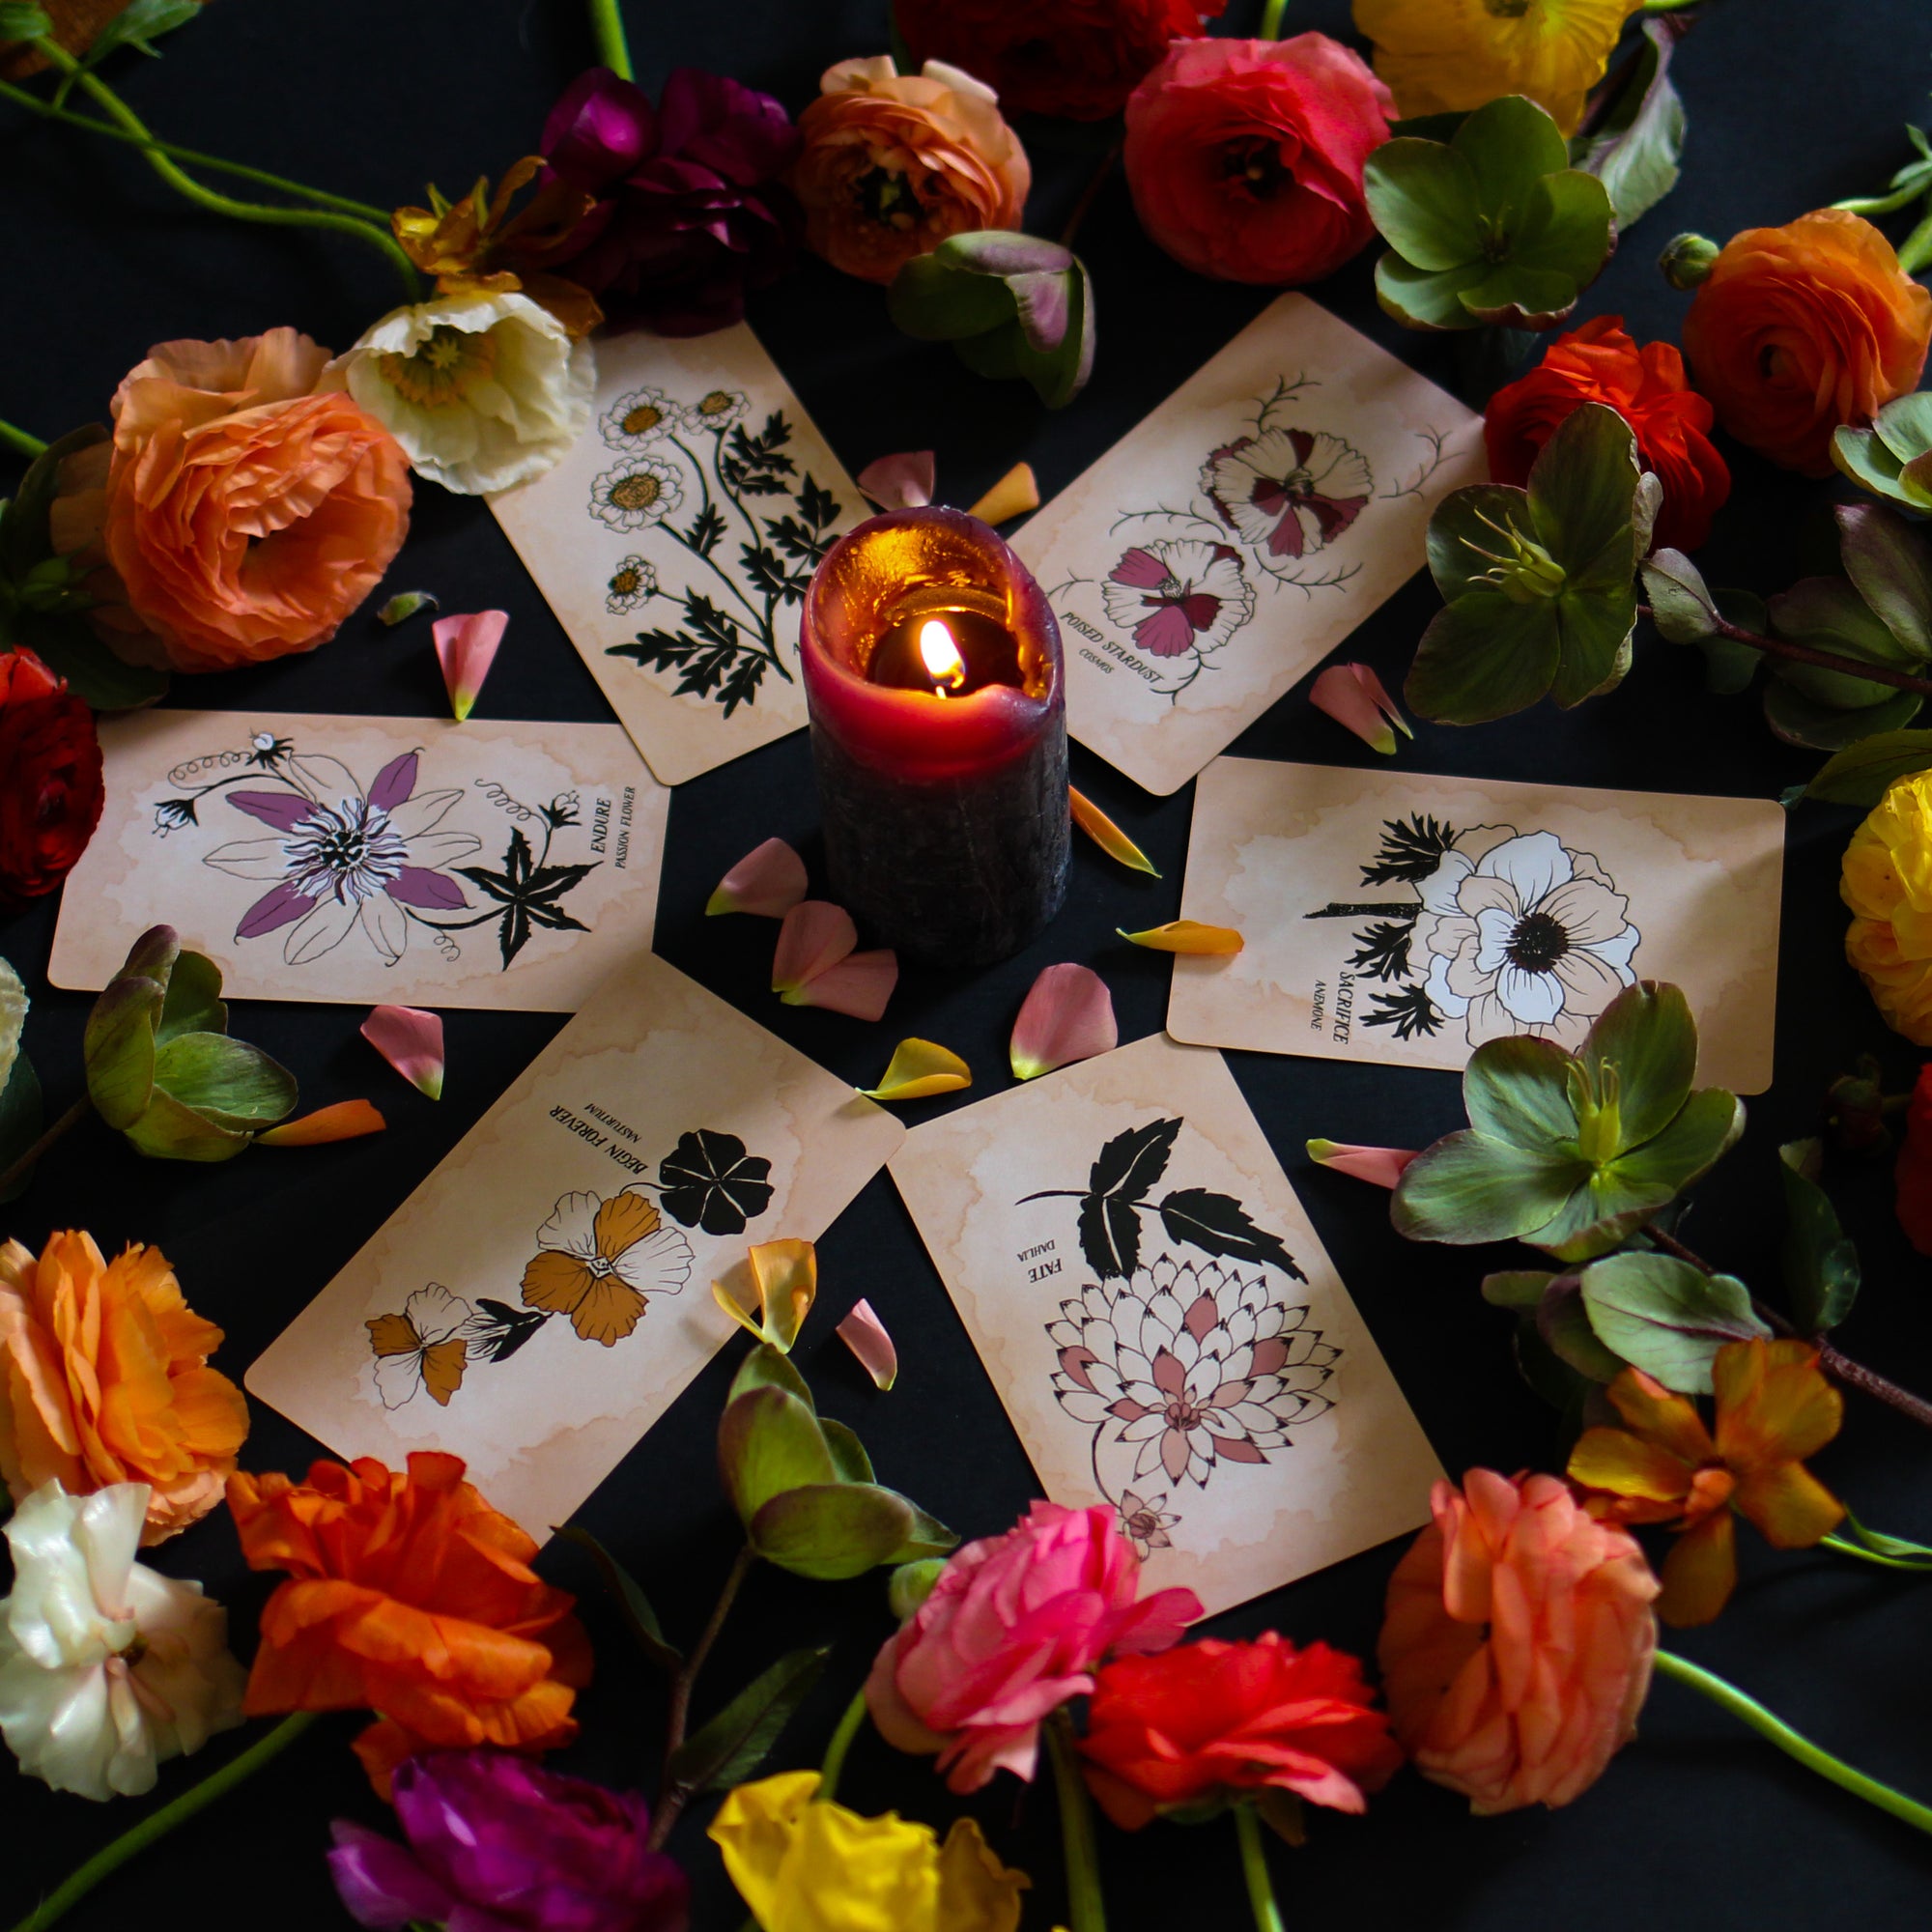 Rooted in mythology, infused with plant magic, Pythia Botanica Oracle is a botanical tarot deck.